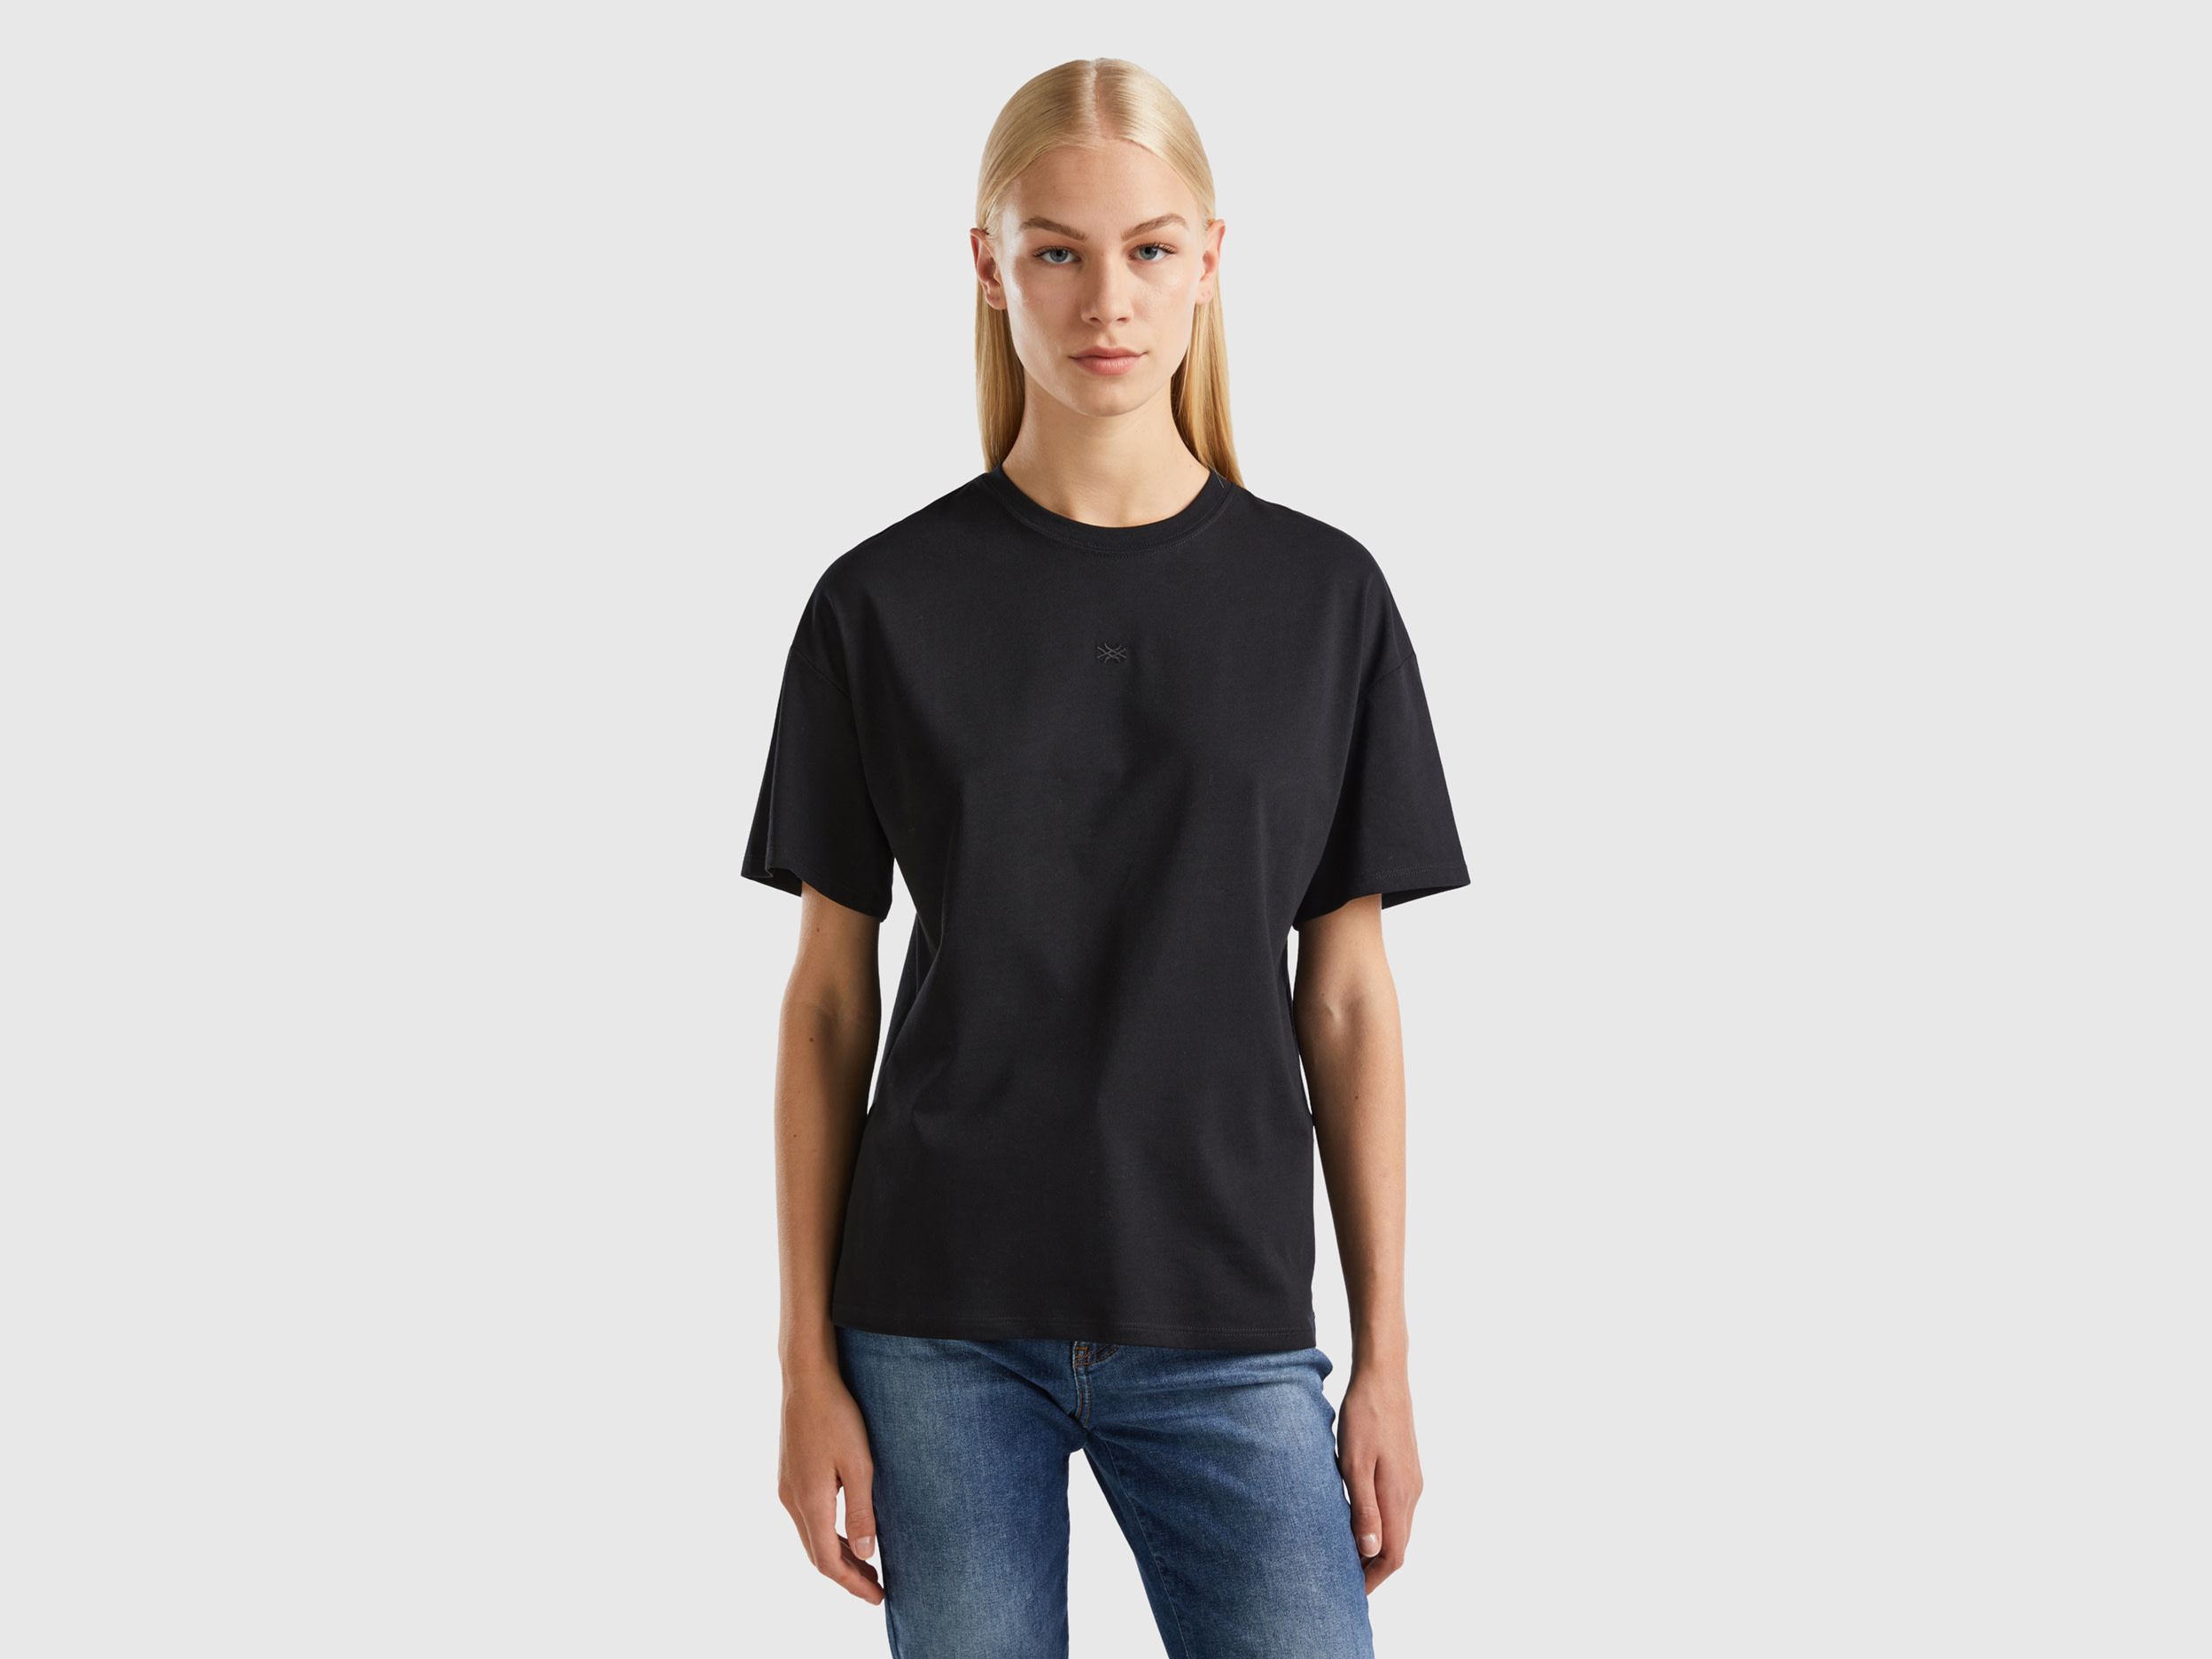 Benetton, T-shirt With Embroidered Logo, size M, Black, Women